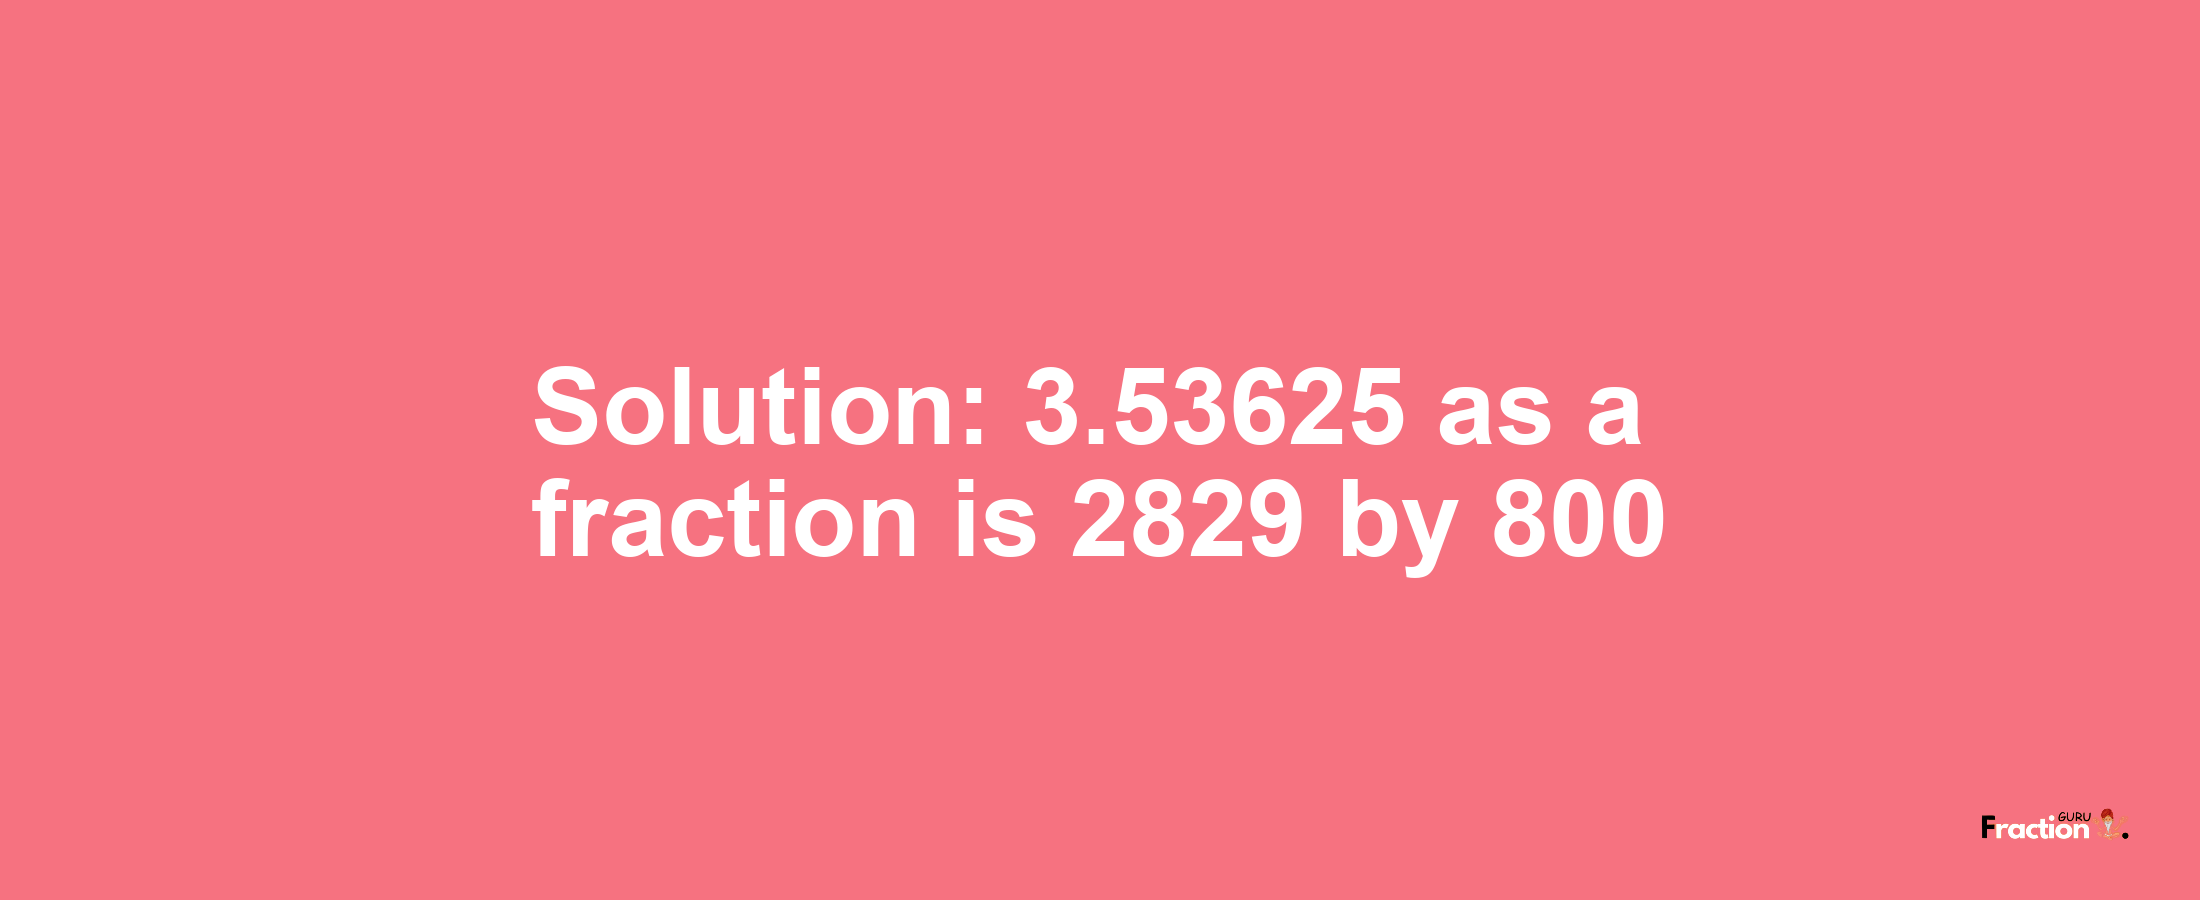 Solution:3.53625 as a fraction is 2829/800